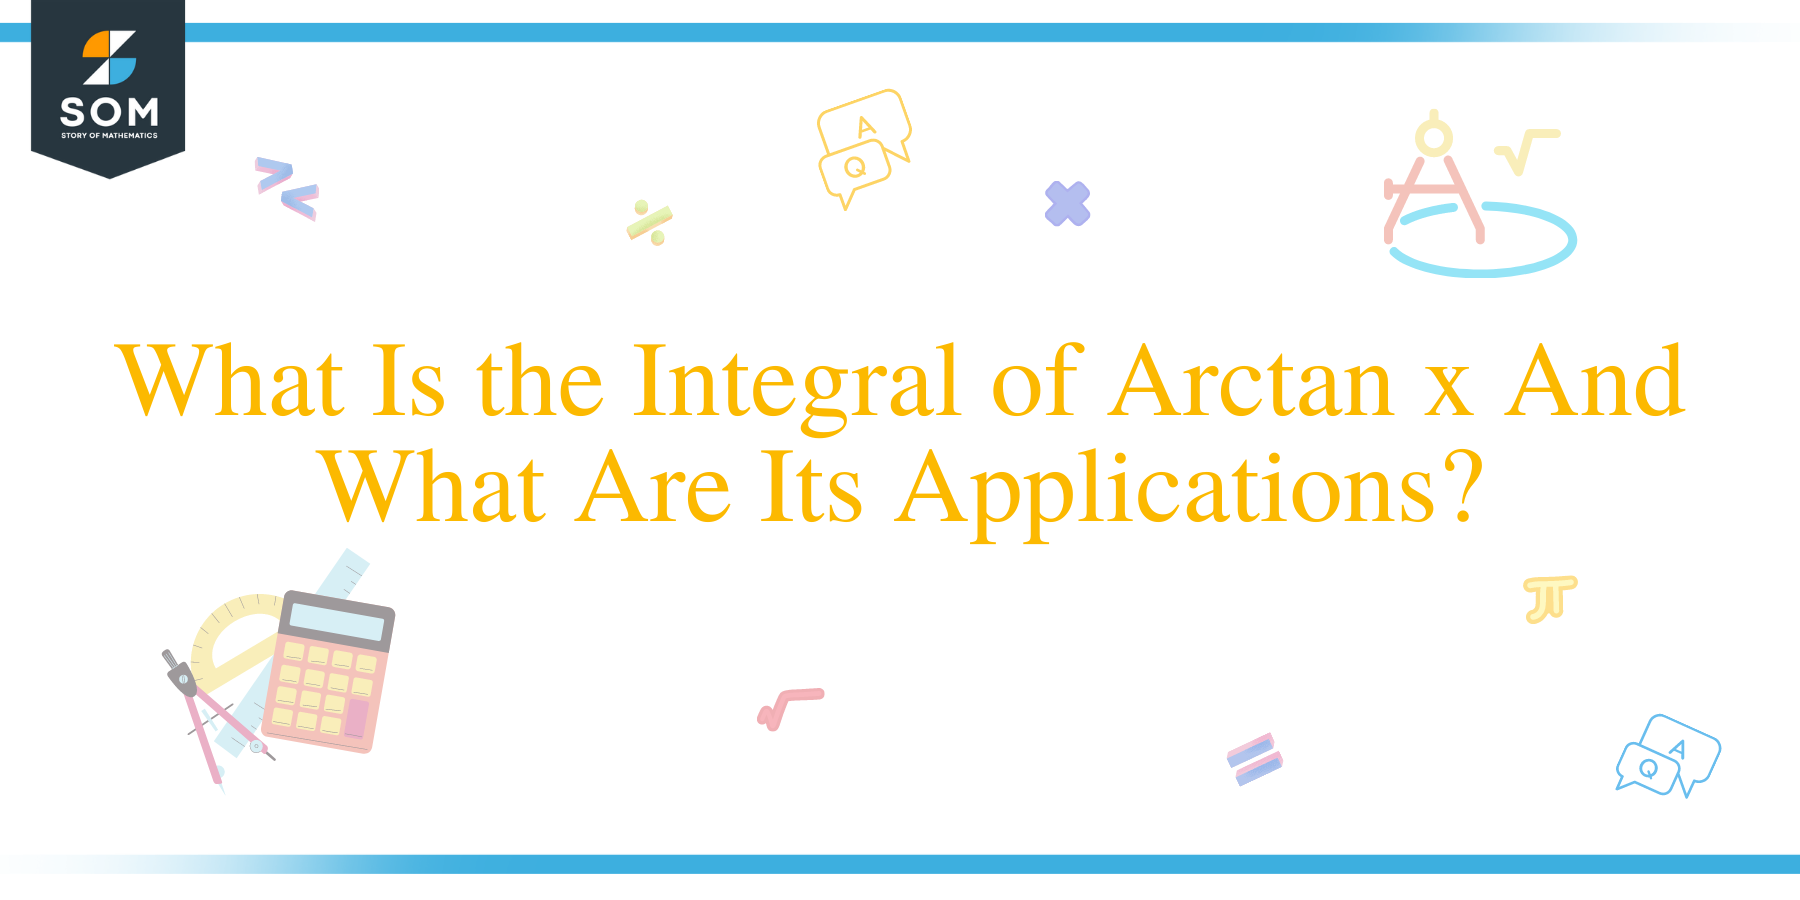 What Is the Integral of Arctan x And What Are Its Applications?